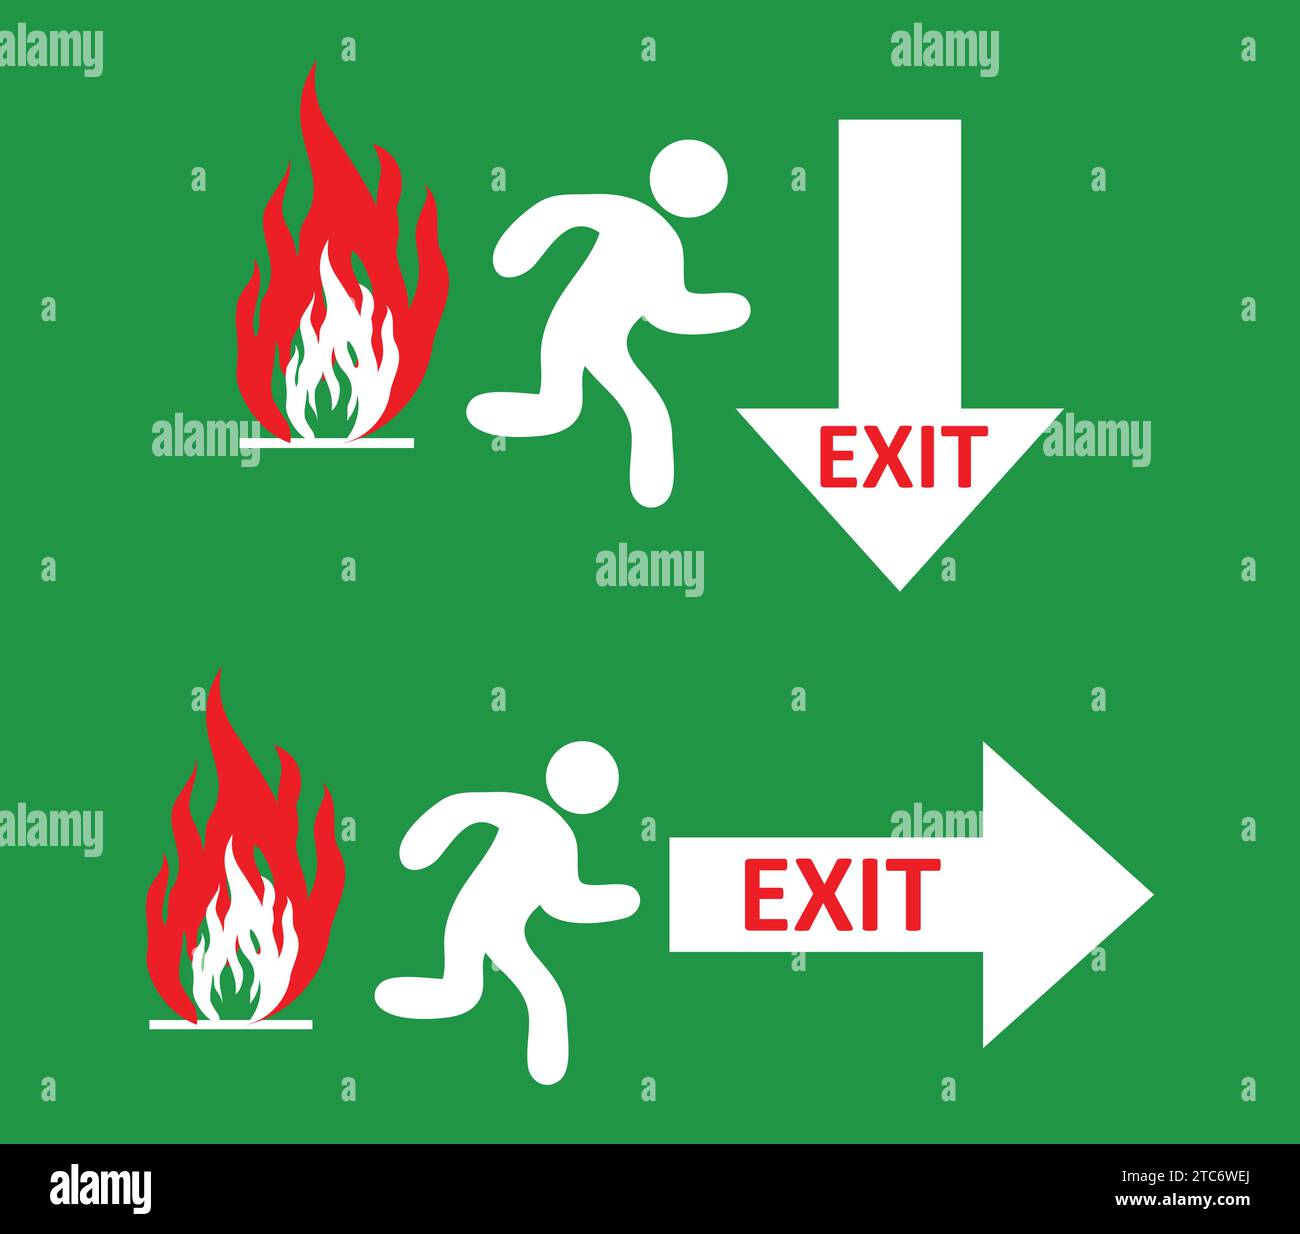 Vector fire exit sign, running main icon, emergency door symbol, arrow pointing sign. Stock Vector